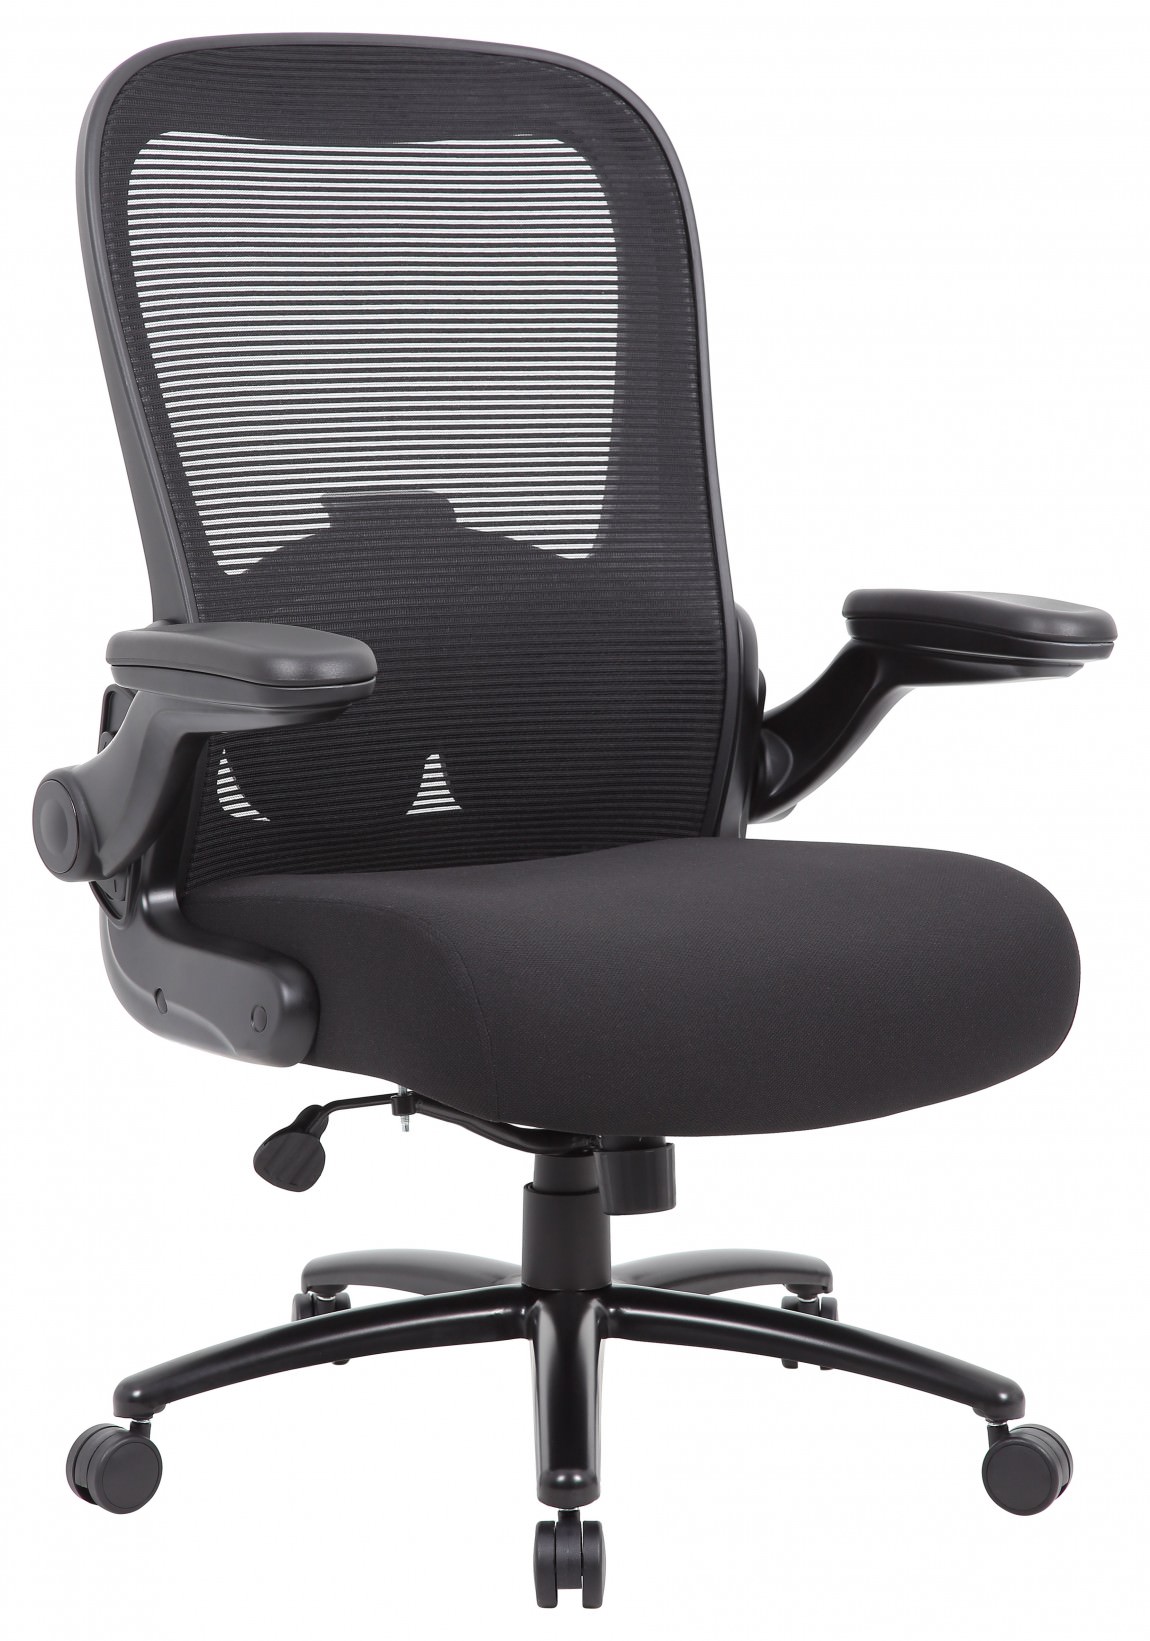 Heavy Duty Office Chair - Black by Boss Office Products